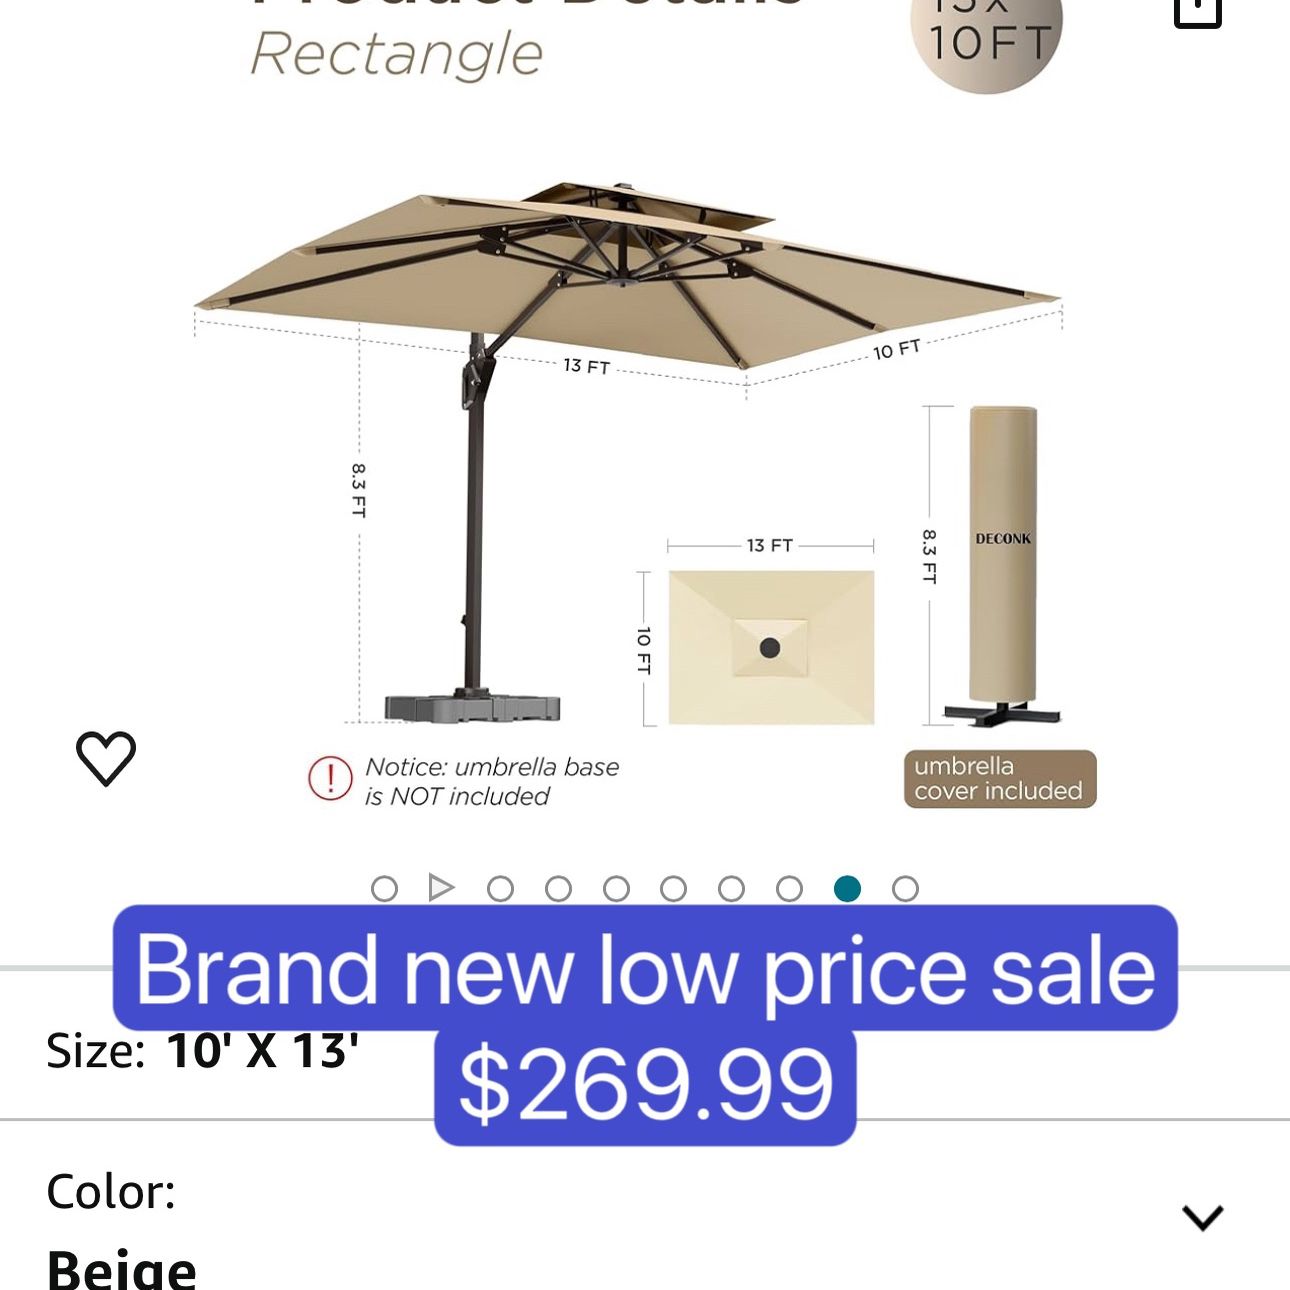 10' X 13' Patio Umbrella Outdoor Large Rectangle Cantilever Umbrellas Double Top Heavy Duty Windproof Offset Umbrella with 360-degree Rotation for Poo